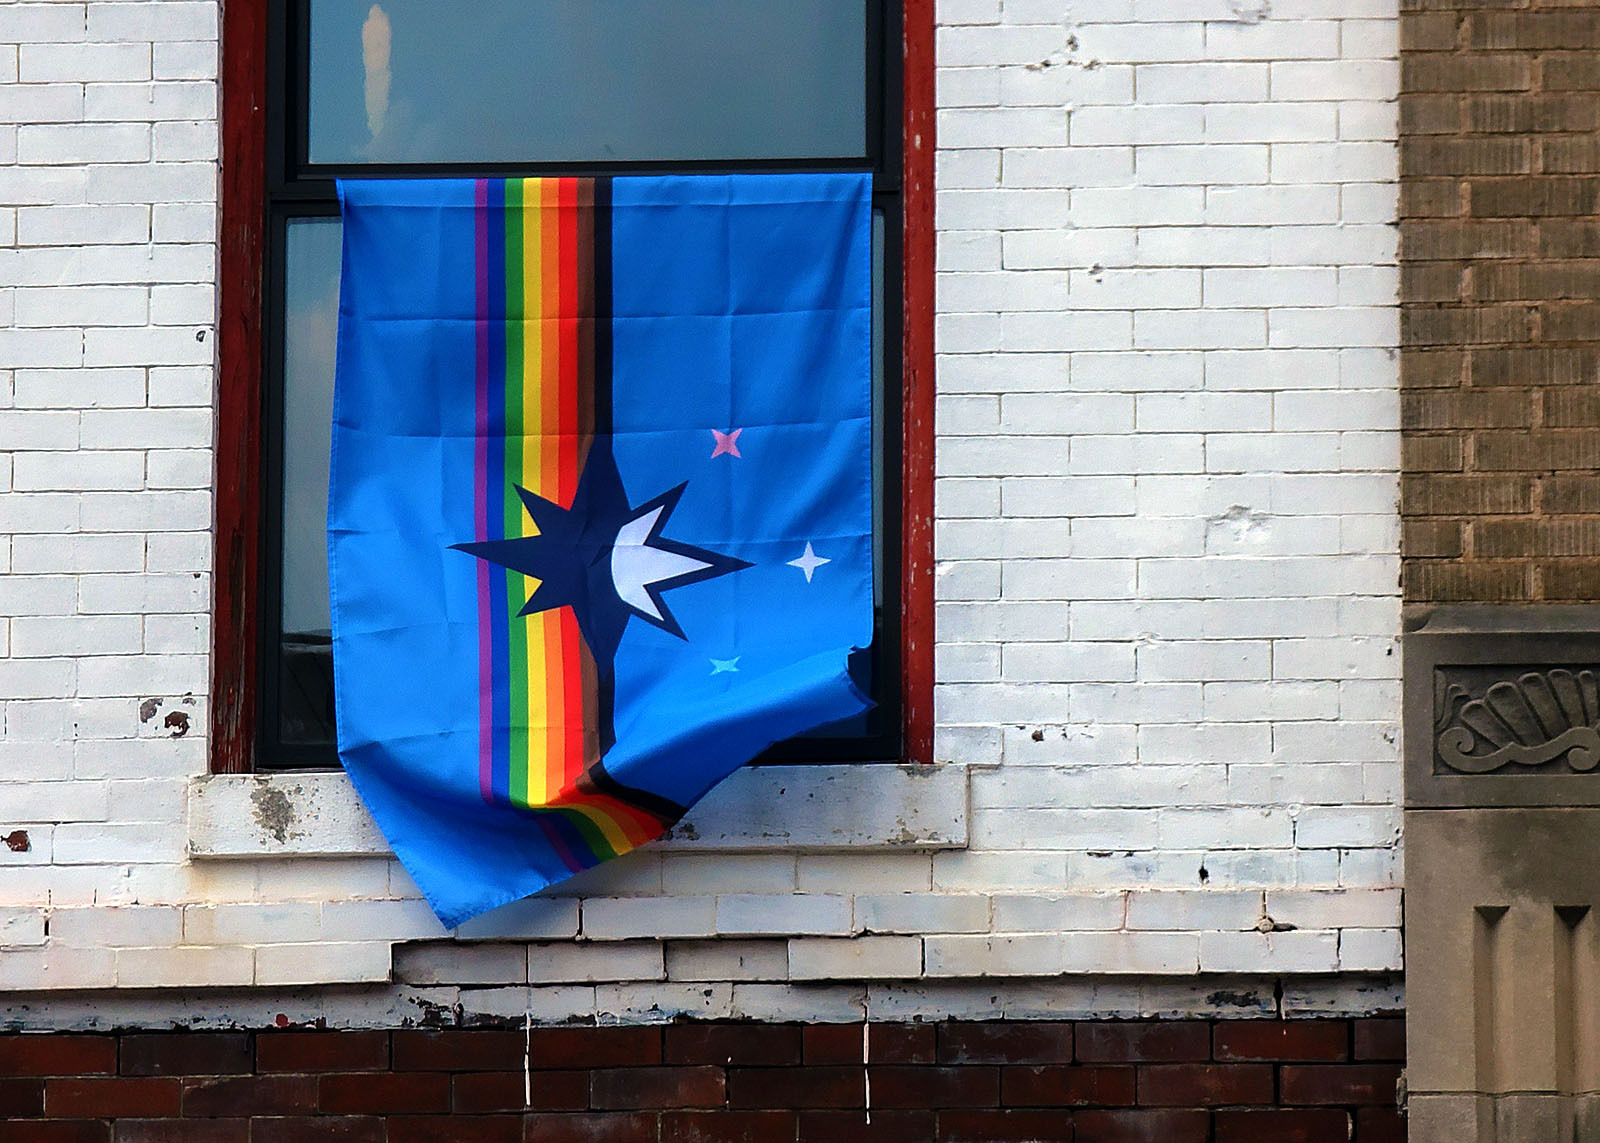 Springfield pride flag hanging outside window.